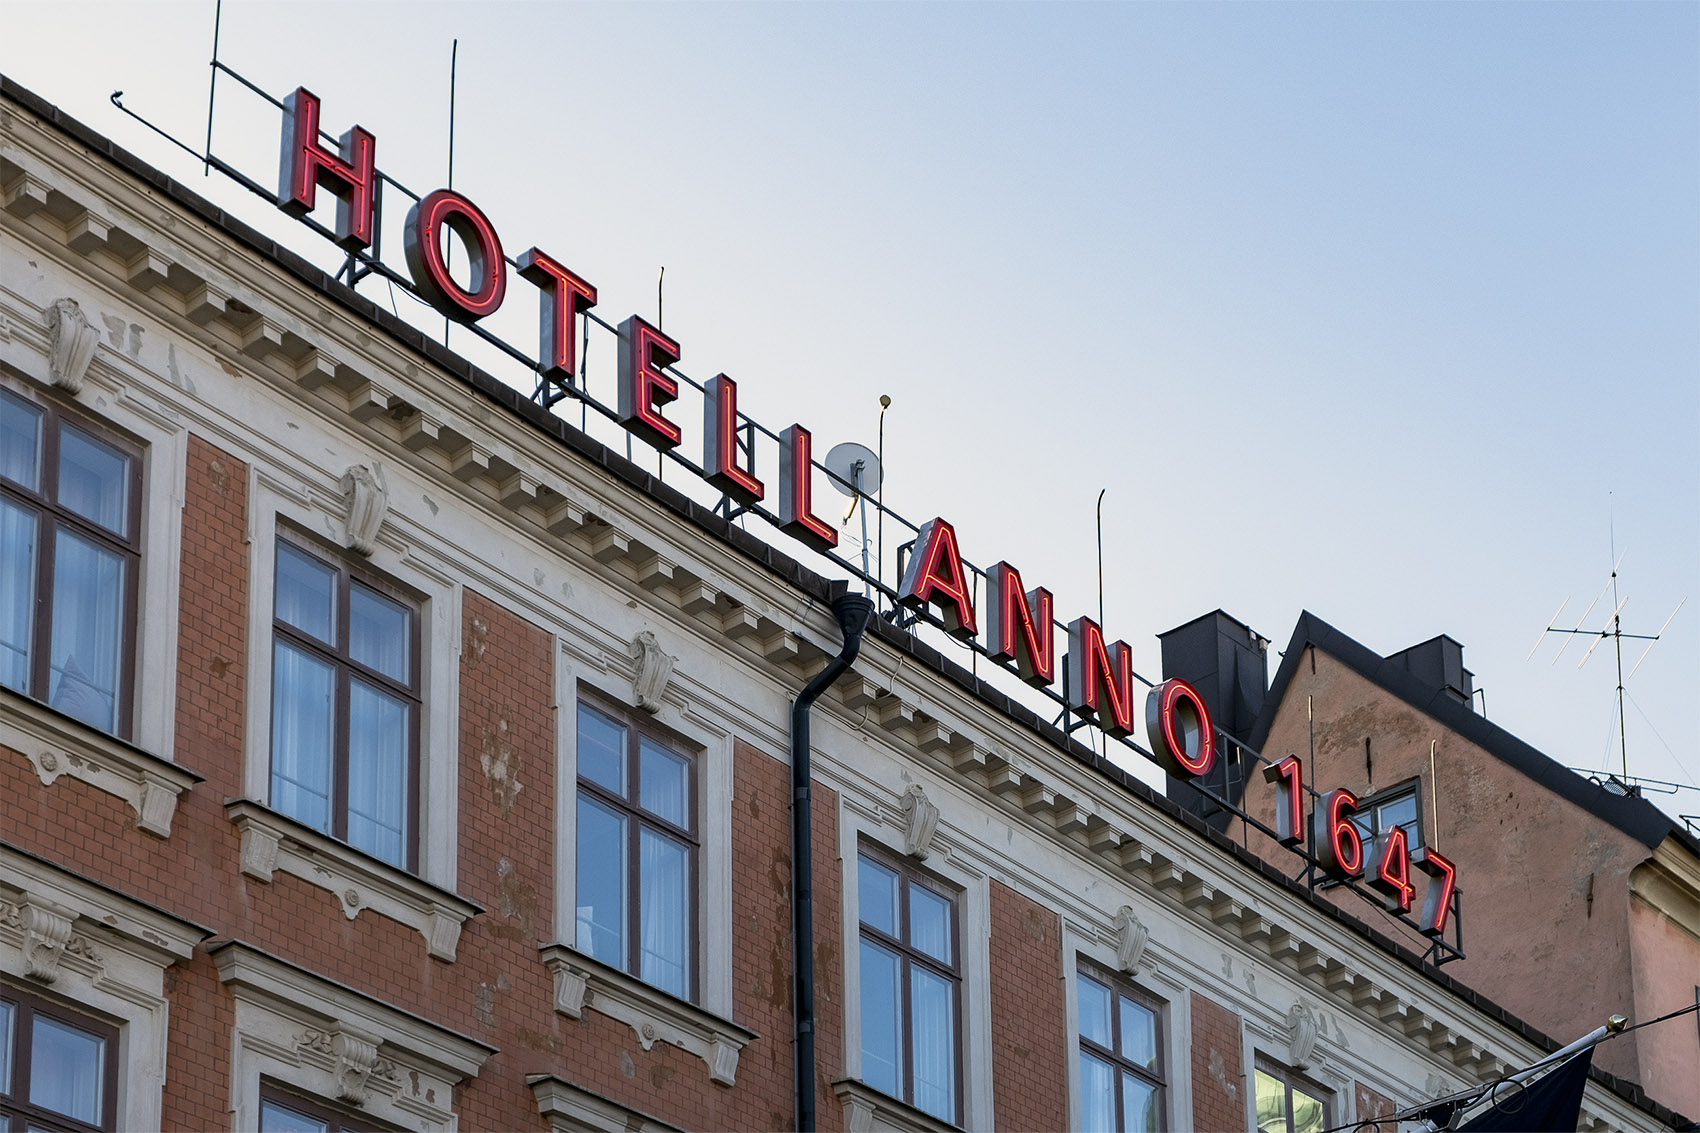 Hotell anno 1647